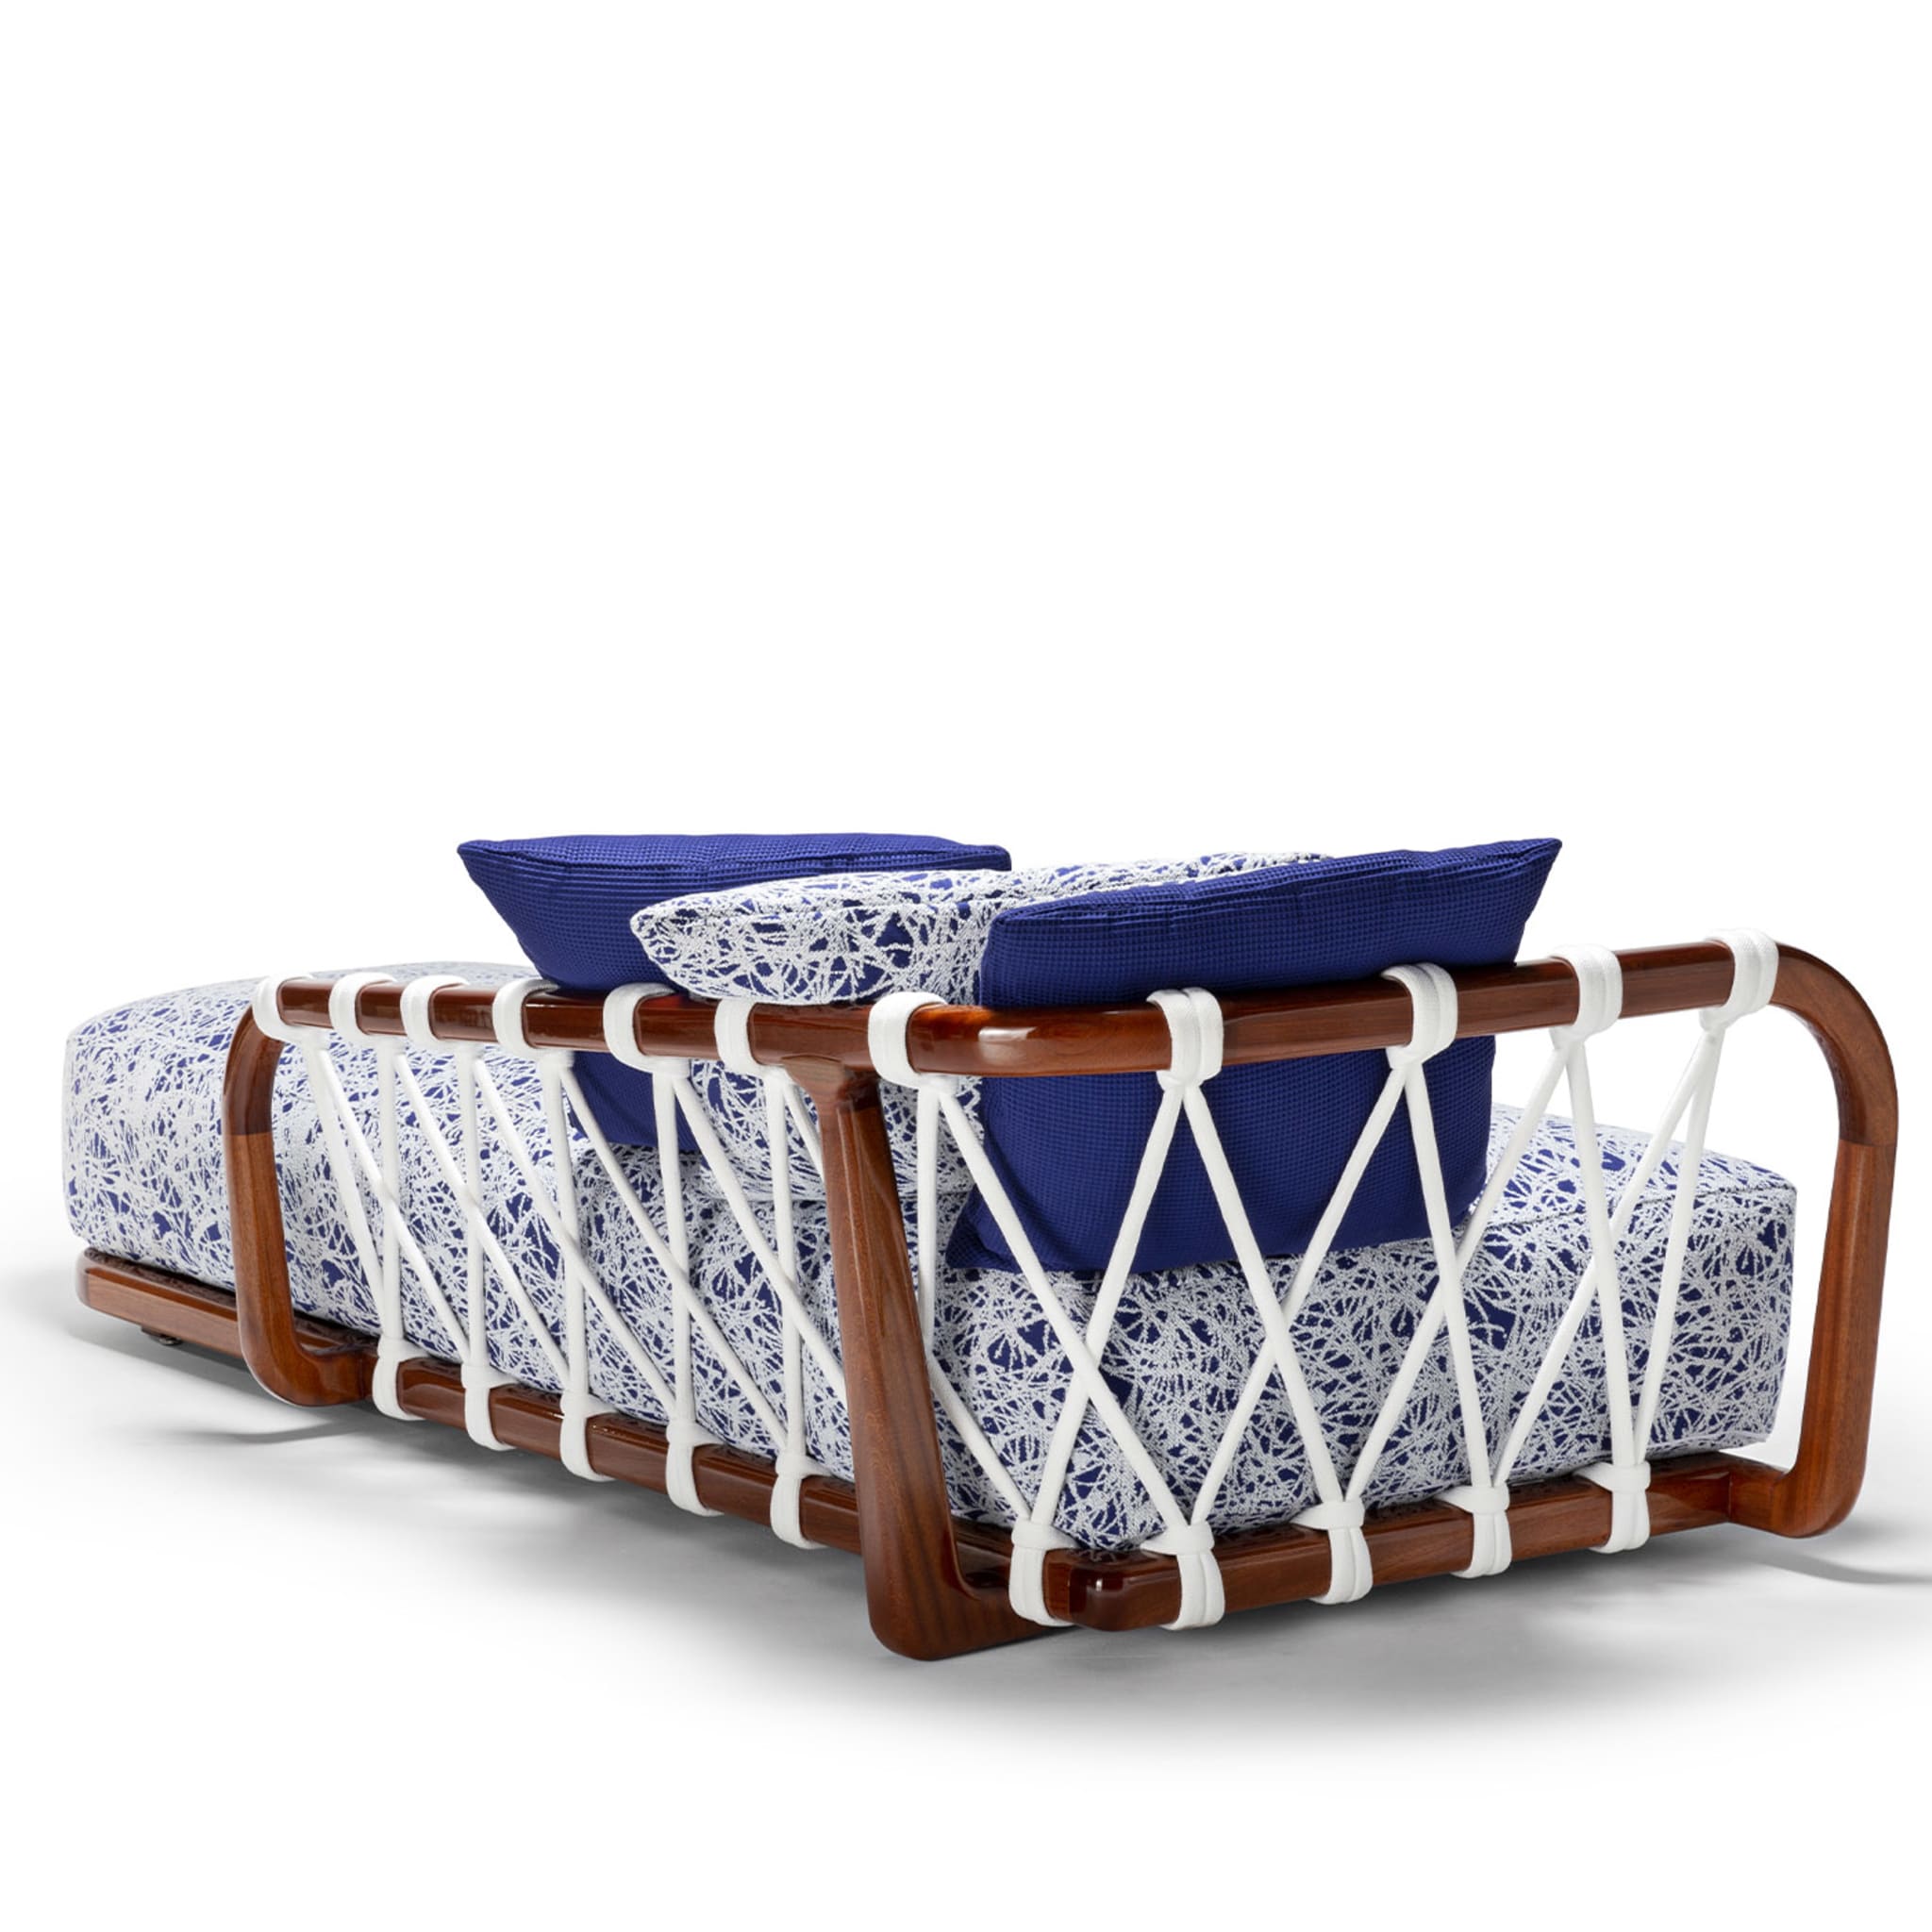 Sunset Basket Blue & White End Element by Paola Navone & AMP - Alternative view 1